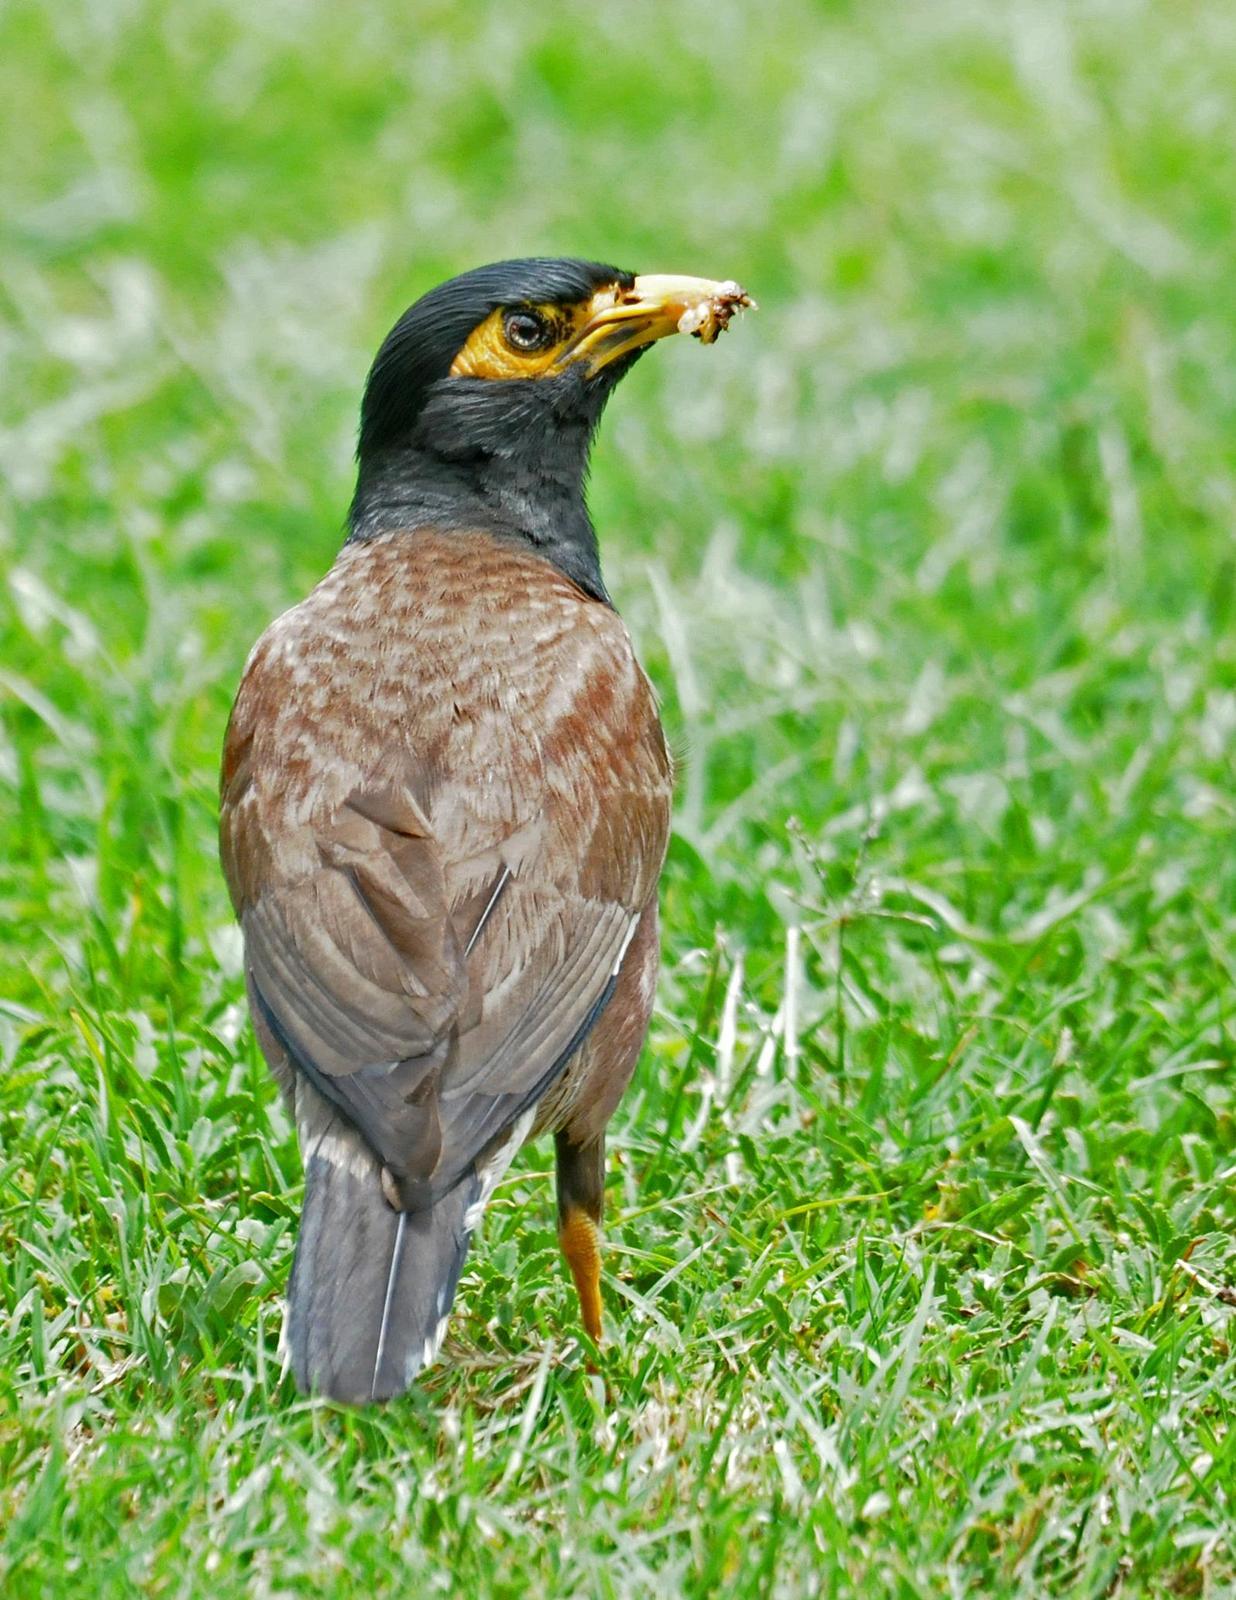 Common Myna Photo by Steven Mlodinow